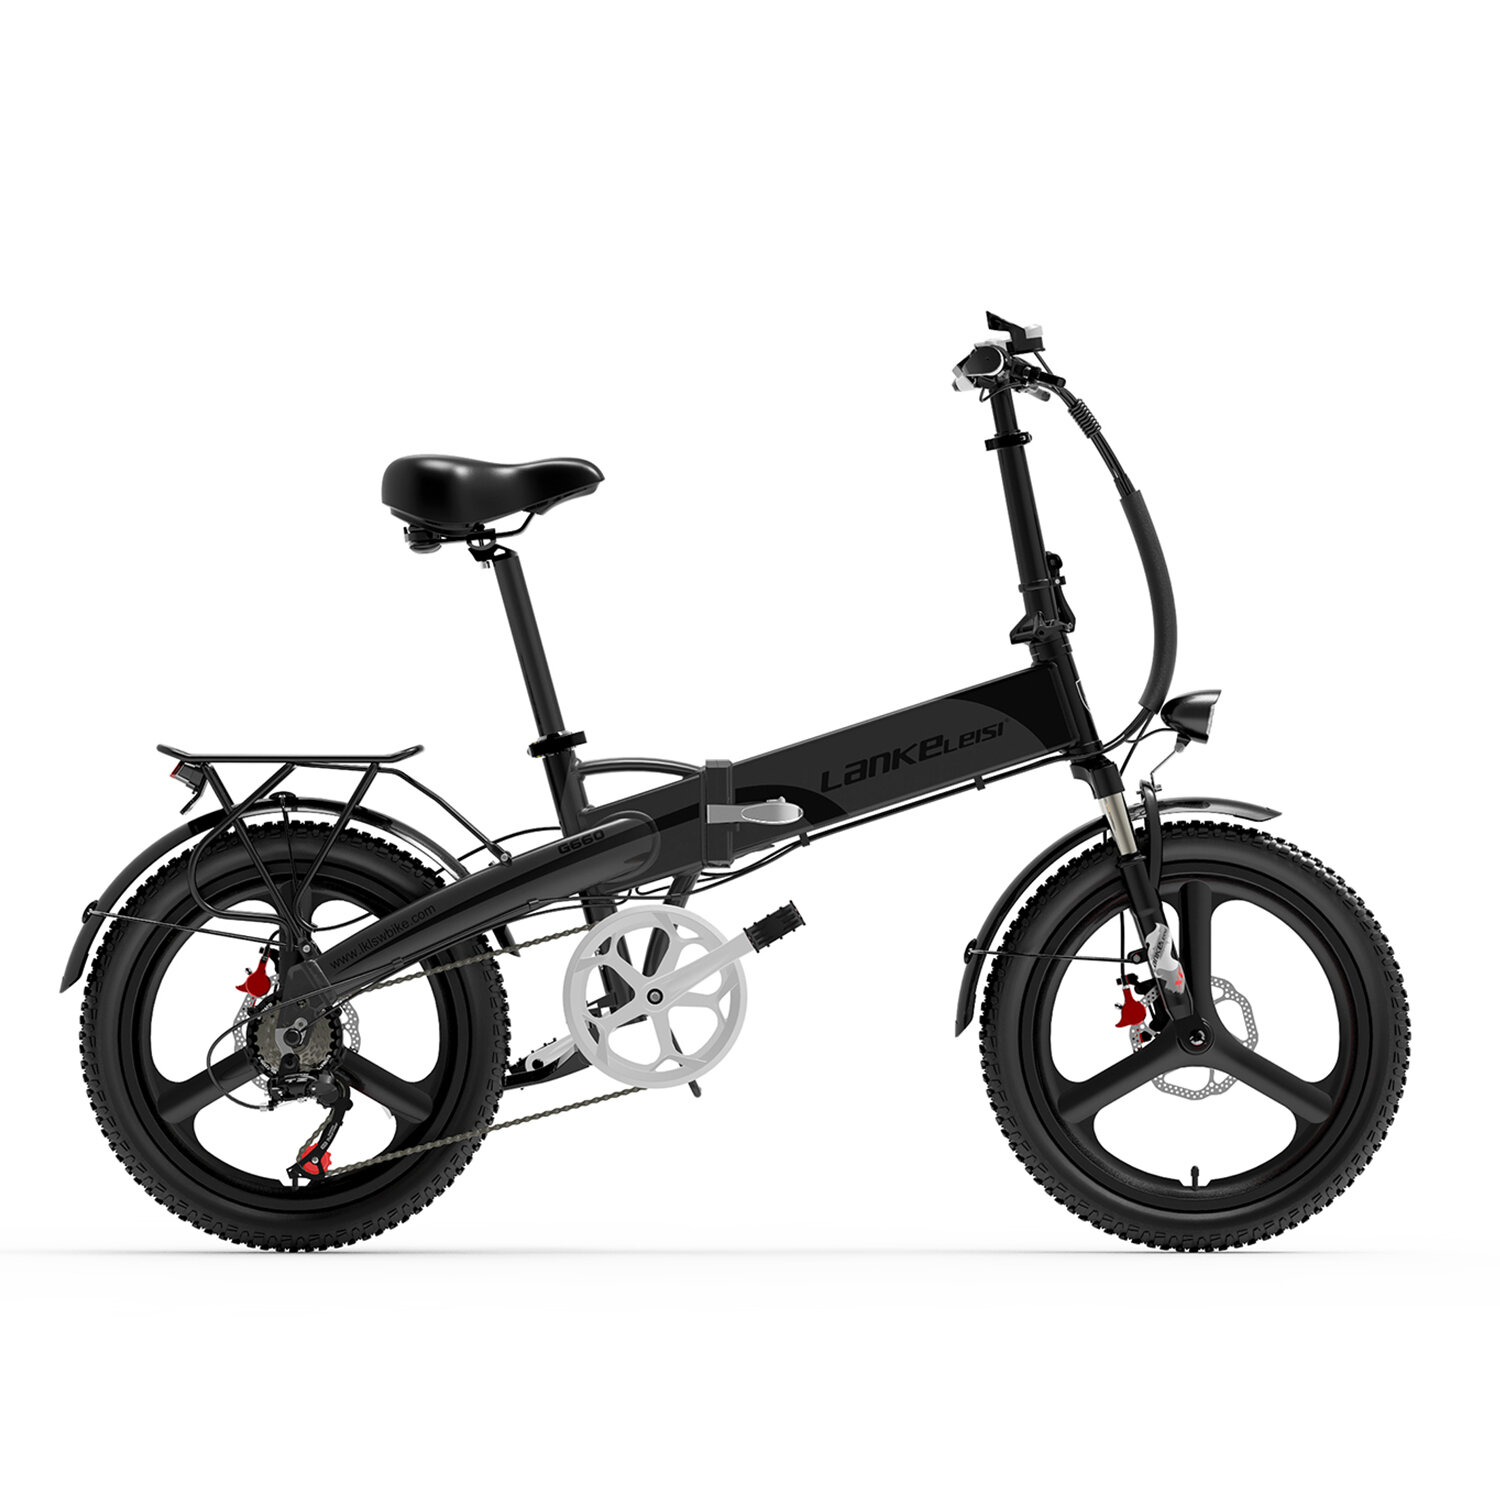 best price,lankeleisi,g660,electric,bike,48v,12.8ah,500w,electric,bicycle,eu,coupon,price,discount